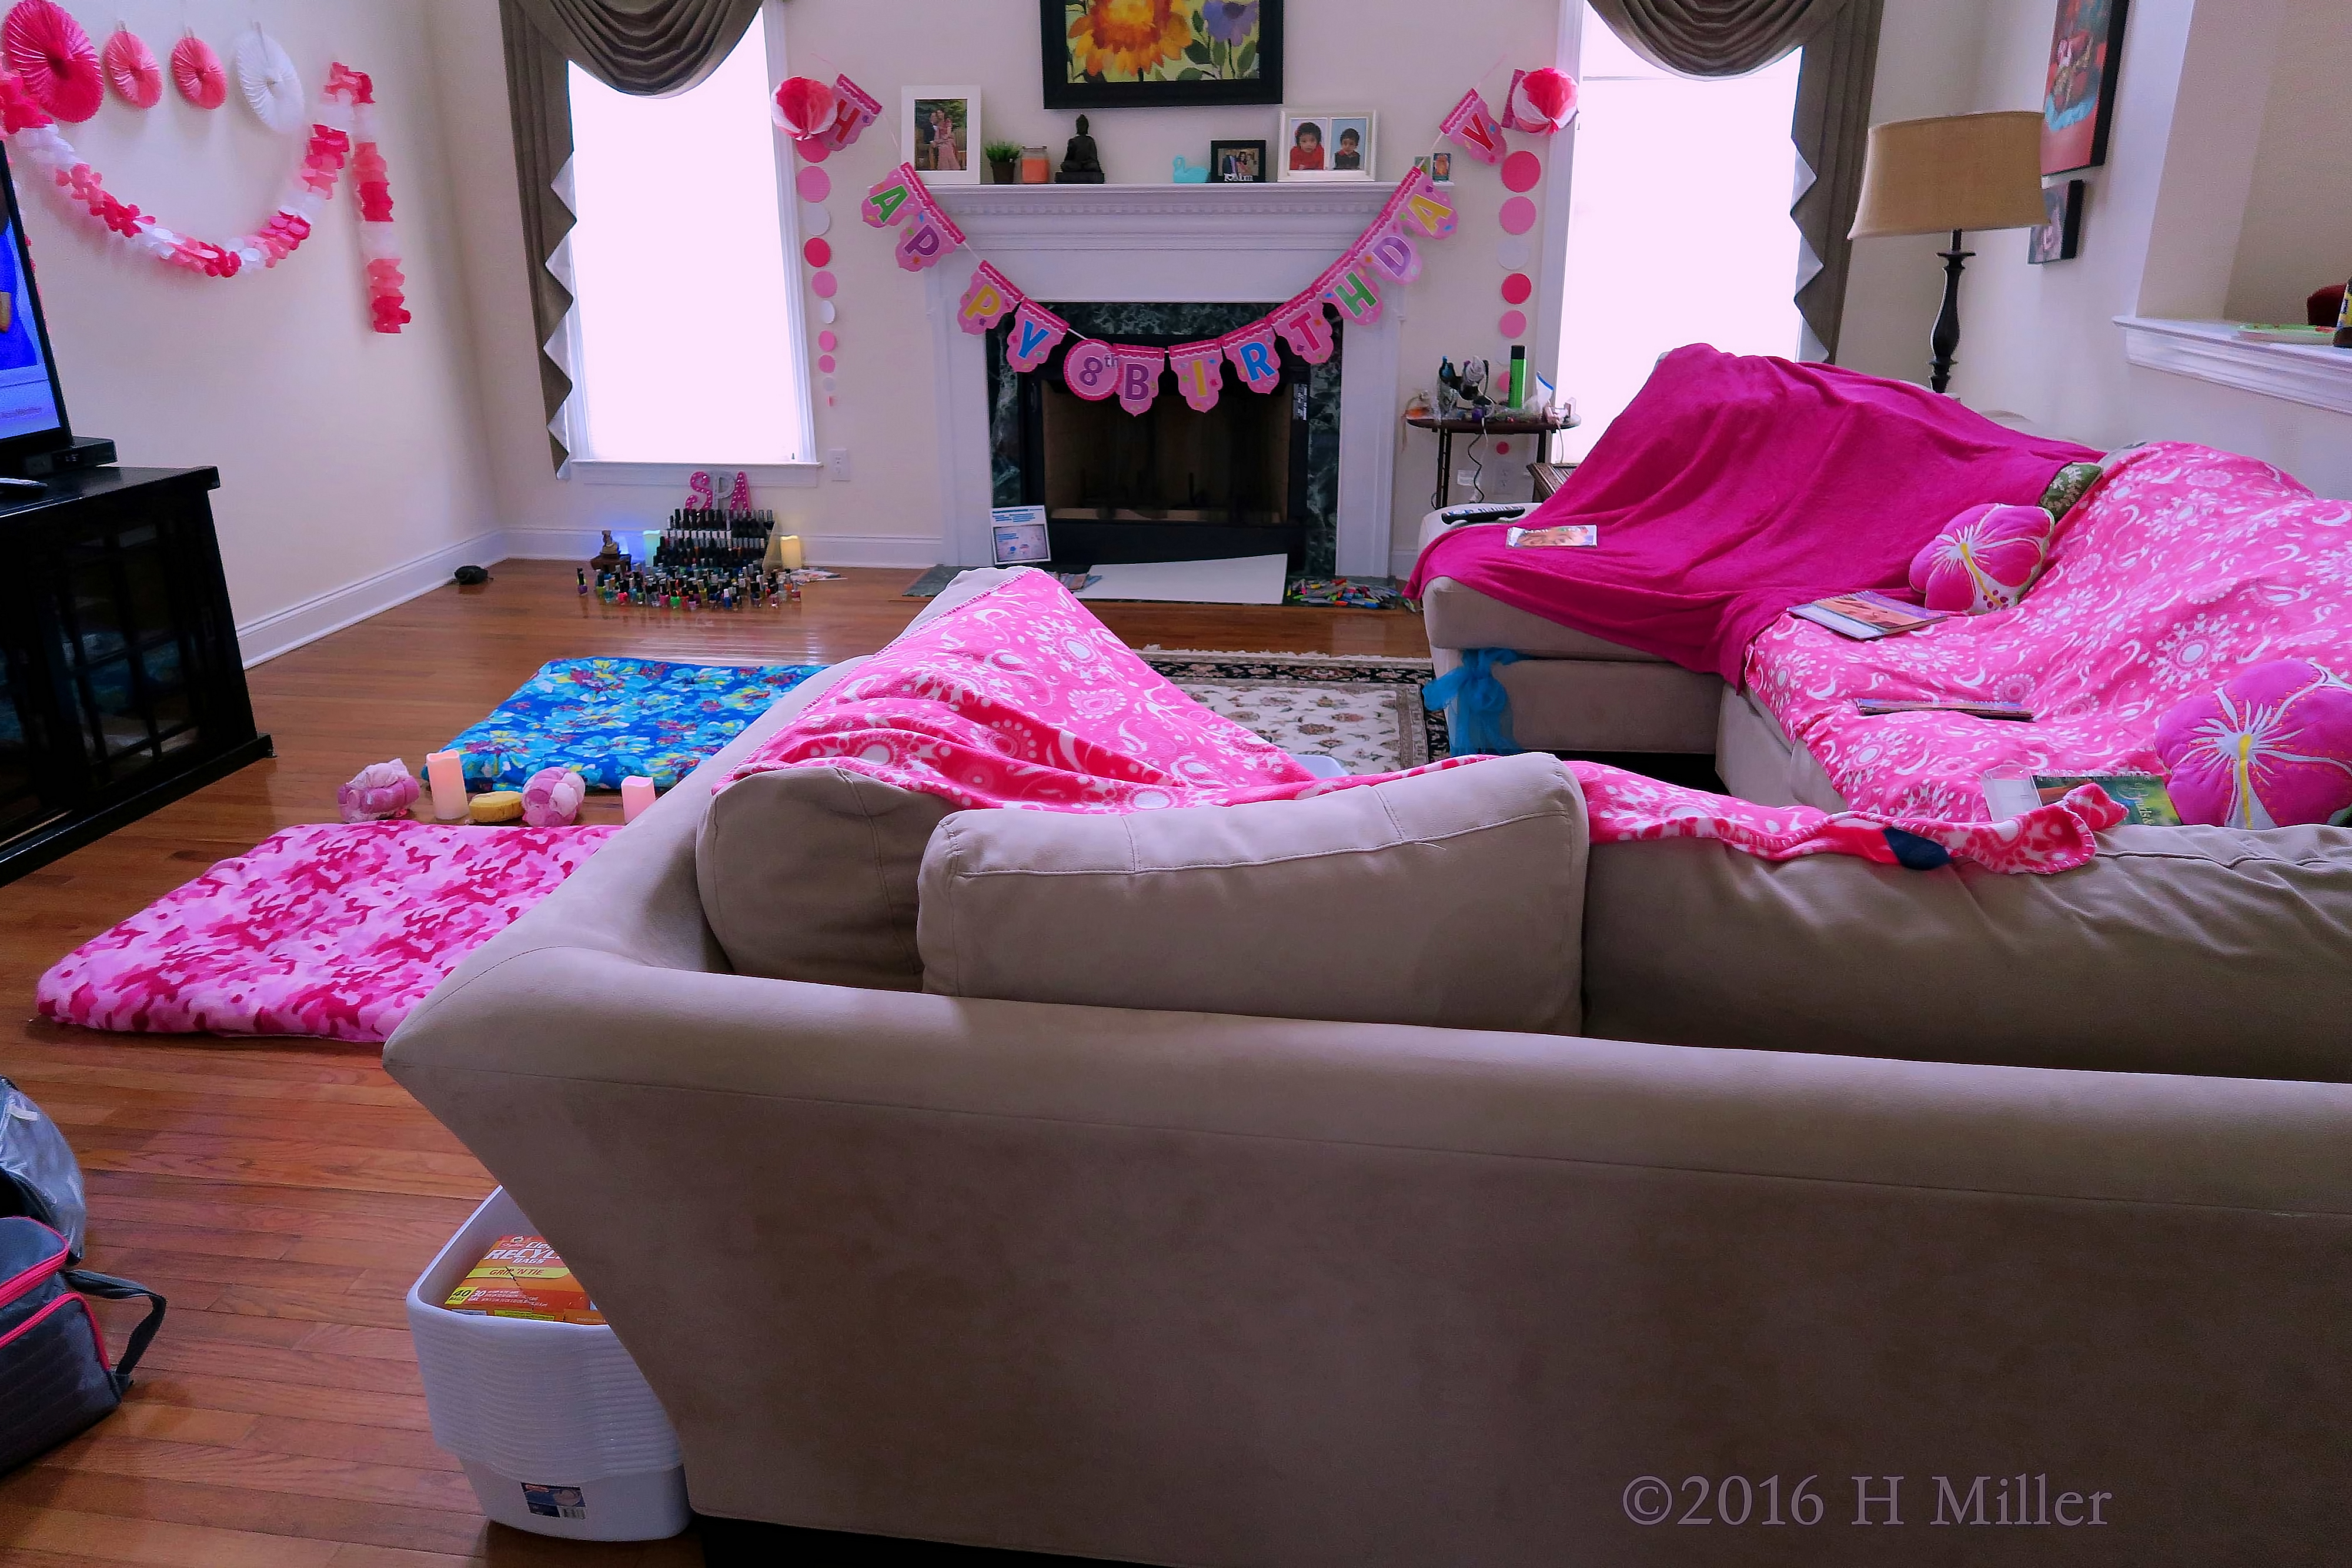 Her House Has Been Transformed Into A Kids Spa!